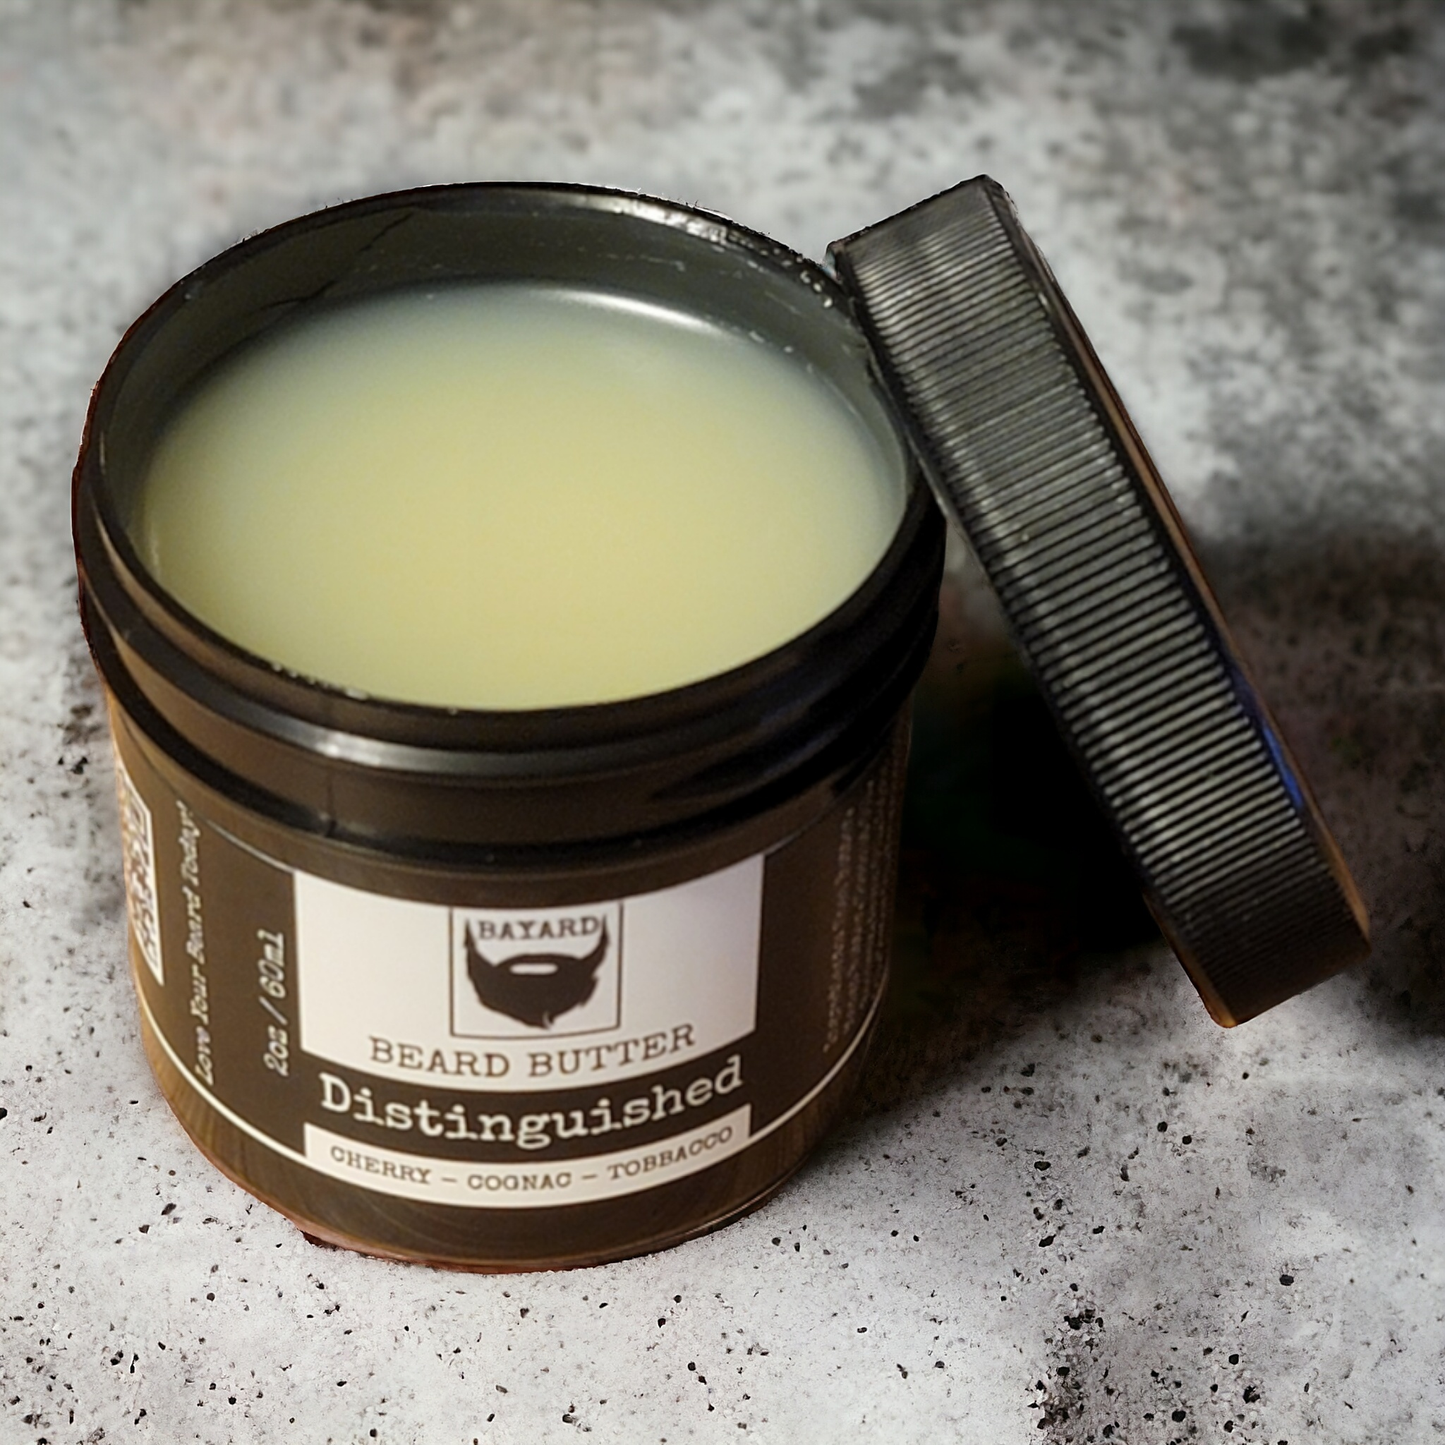 Distinguished Beard Butter by Bayard Beard and Body Beard Butter Cherry Cognac and Tobacco